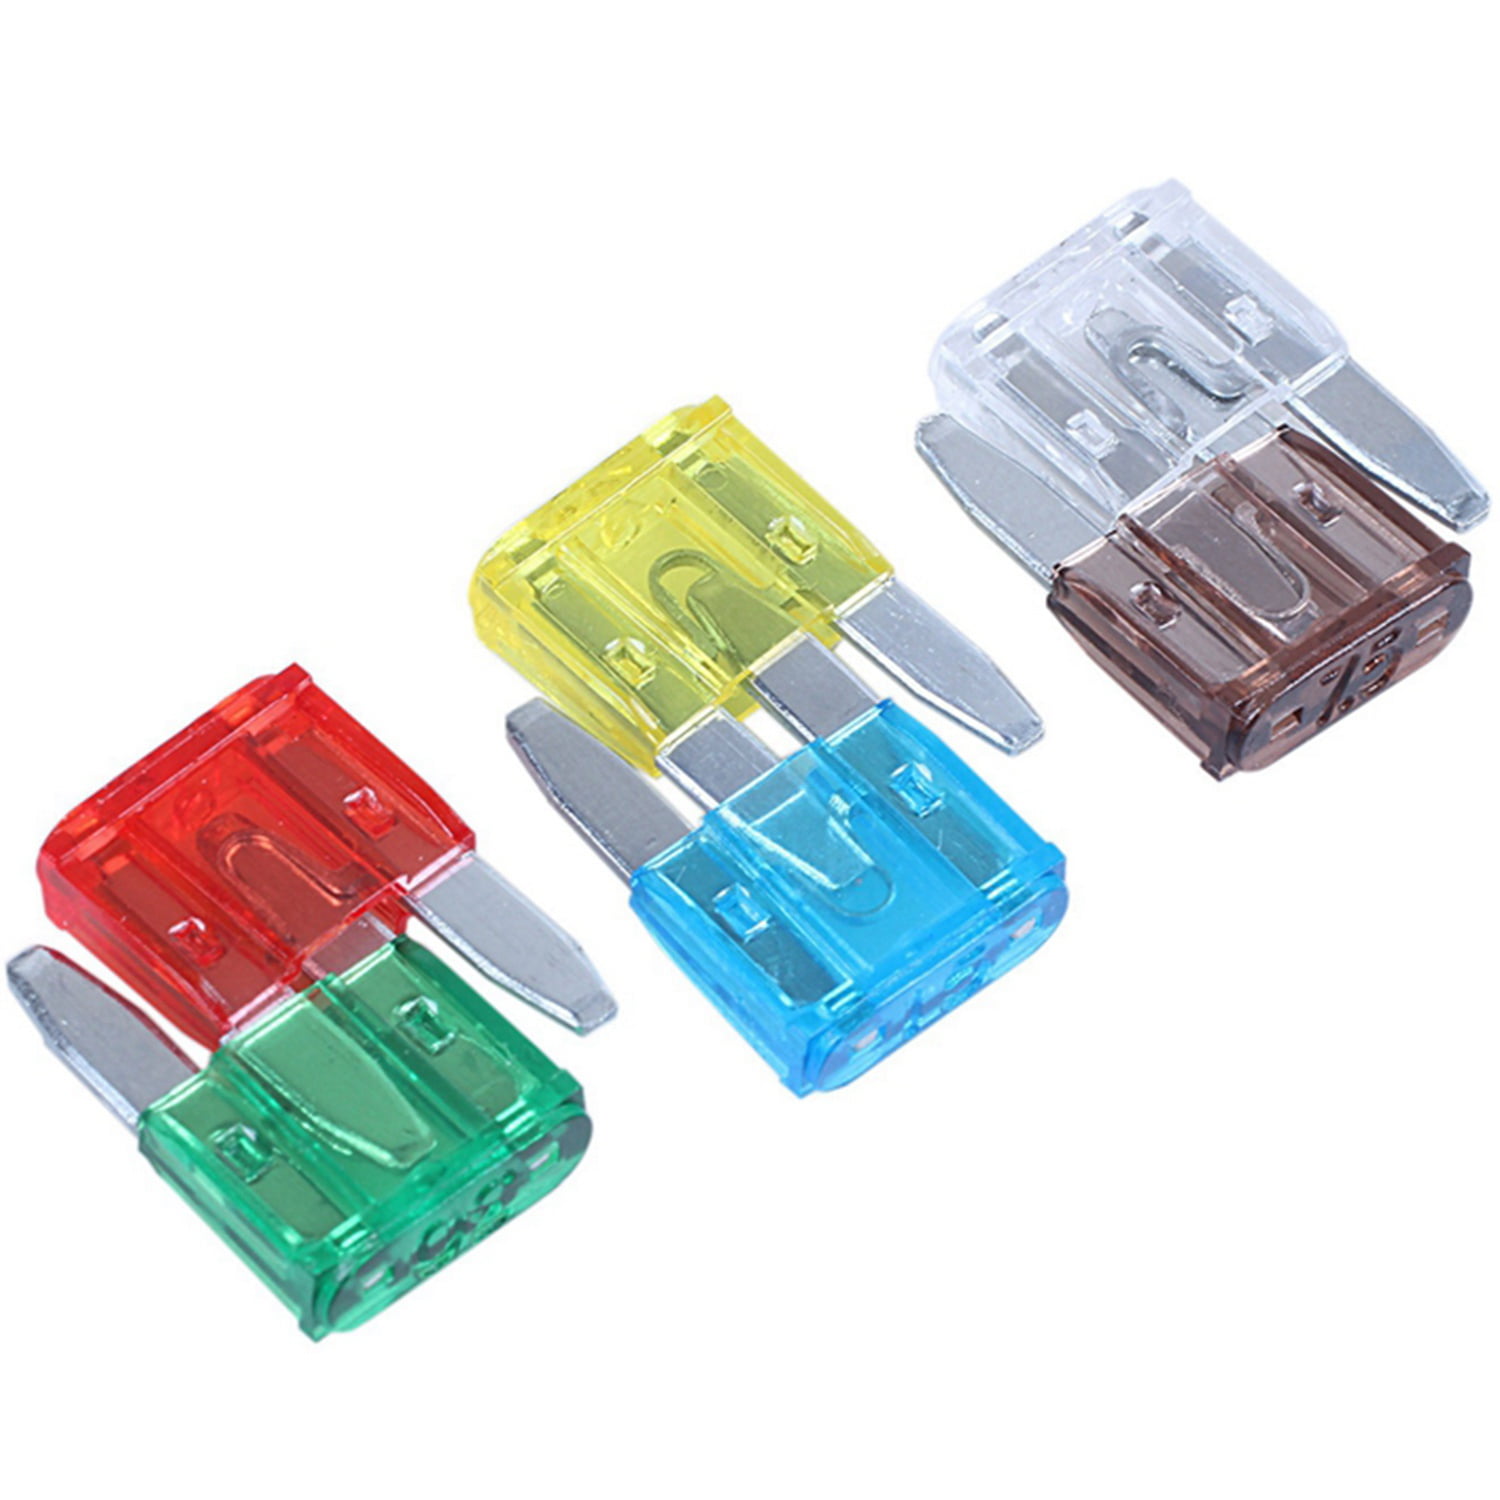 Car Electrical Spare 10x Mini Blade Fuses 10 Amp For Electrical Components 